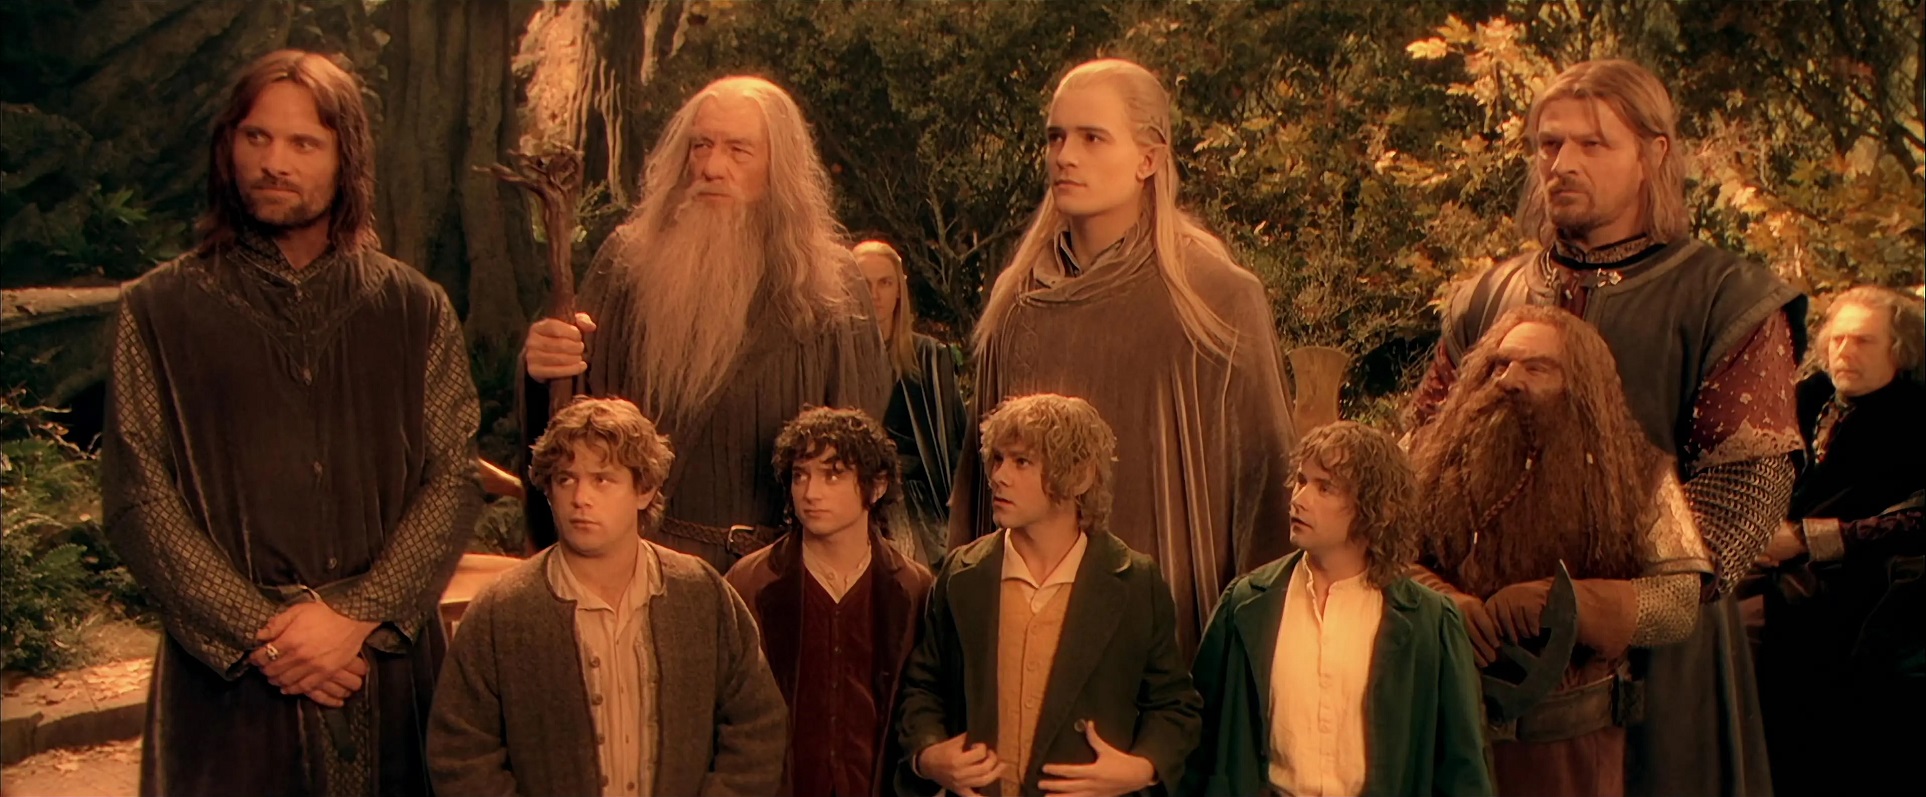 123movies fellowship of the ring